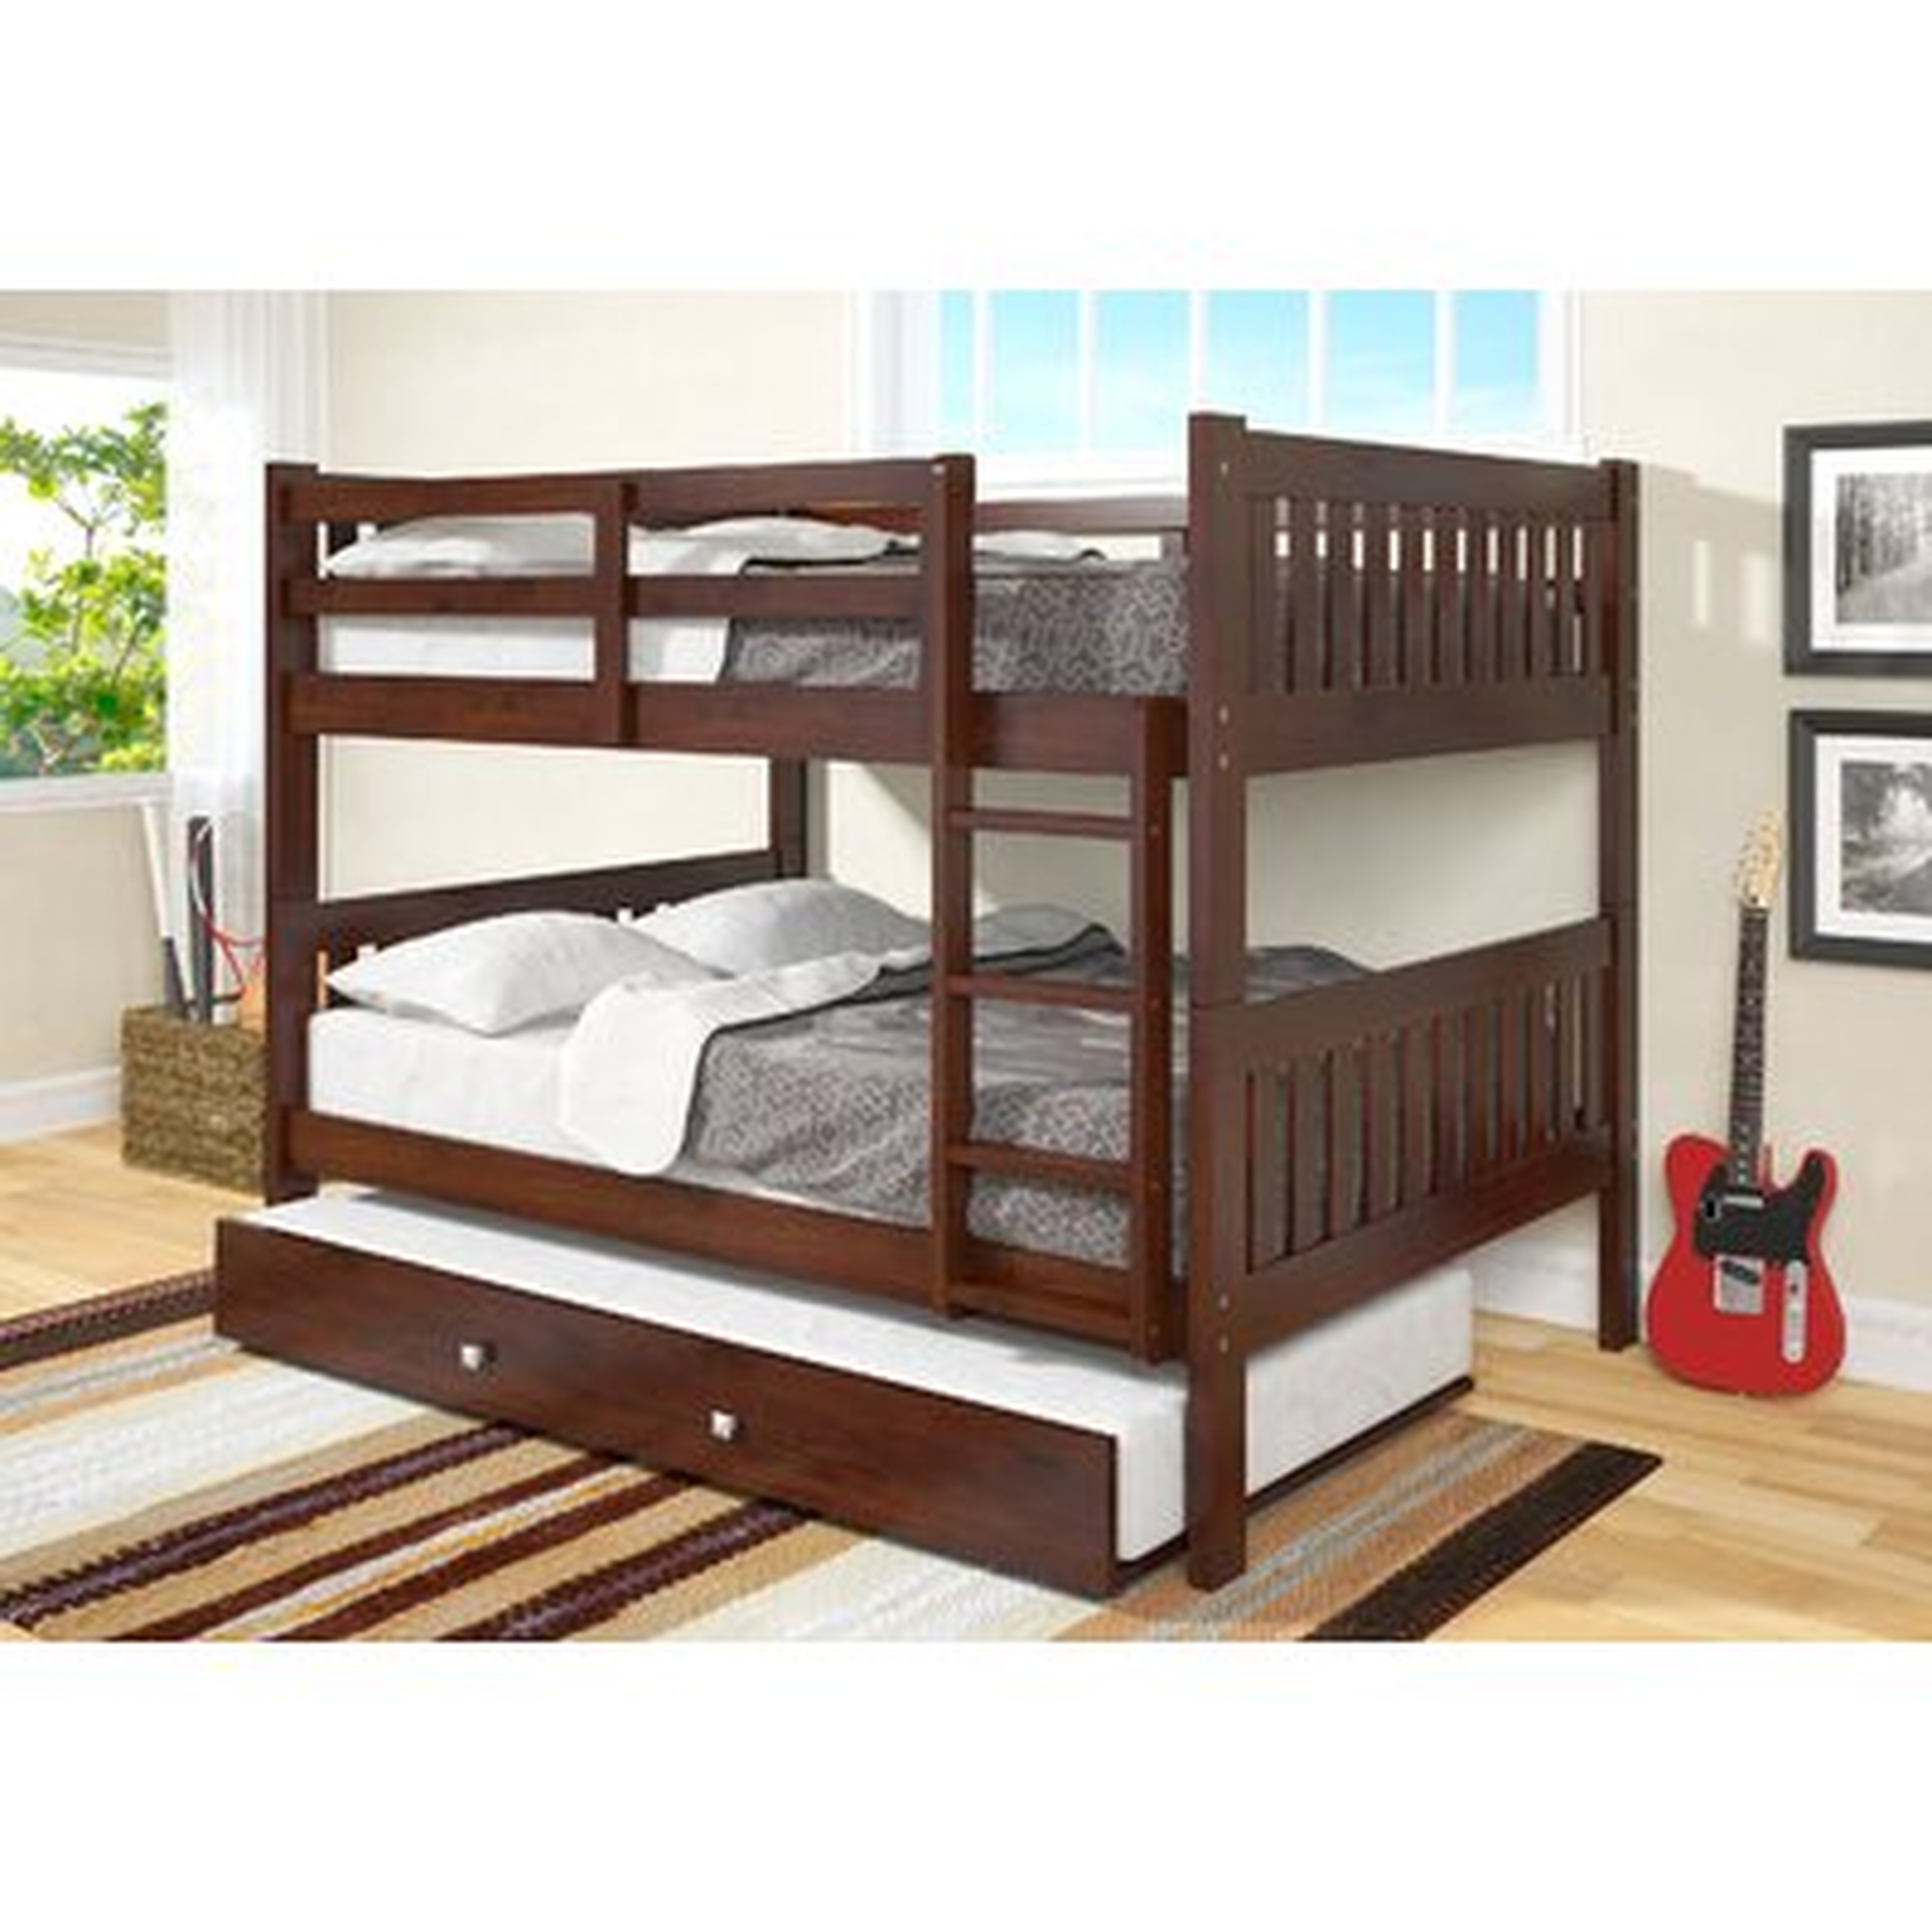 Hargrave Full over Full Bunk Bed with Trundle - Wayfair